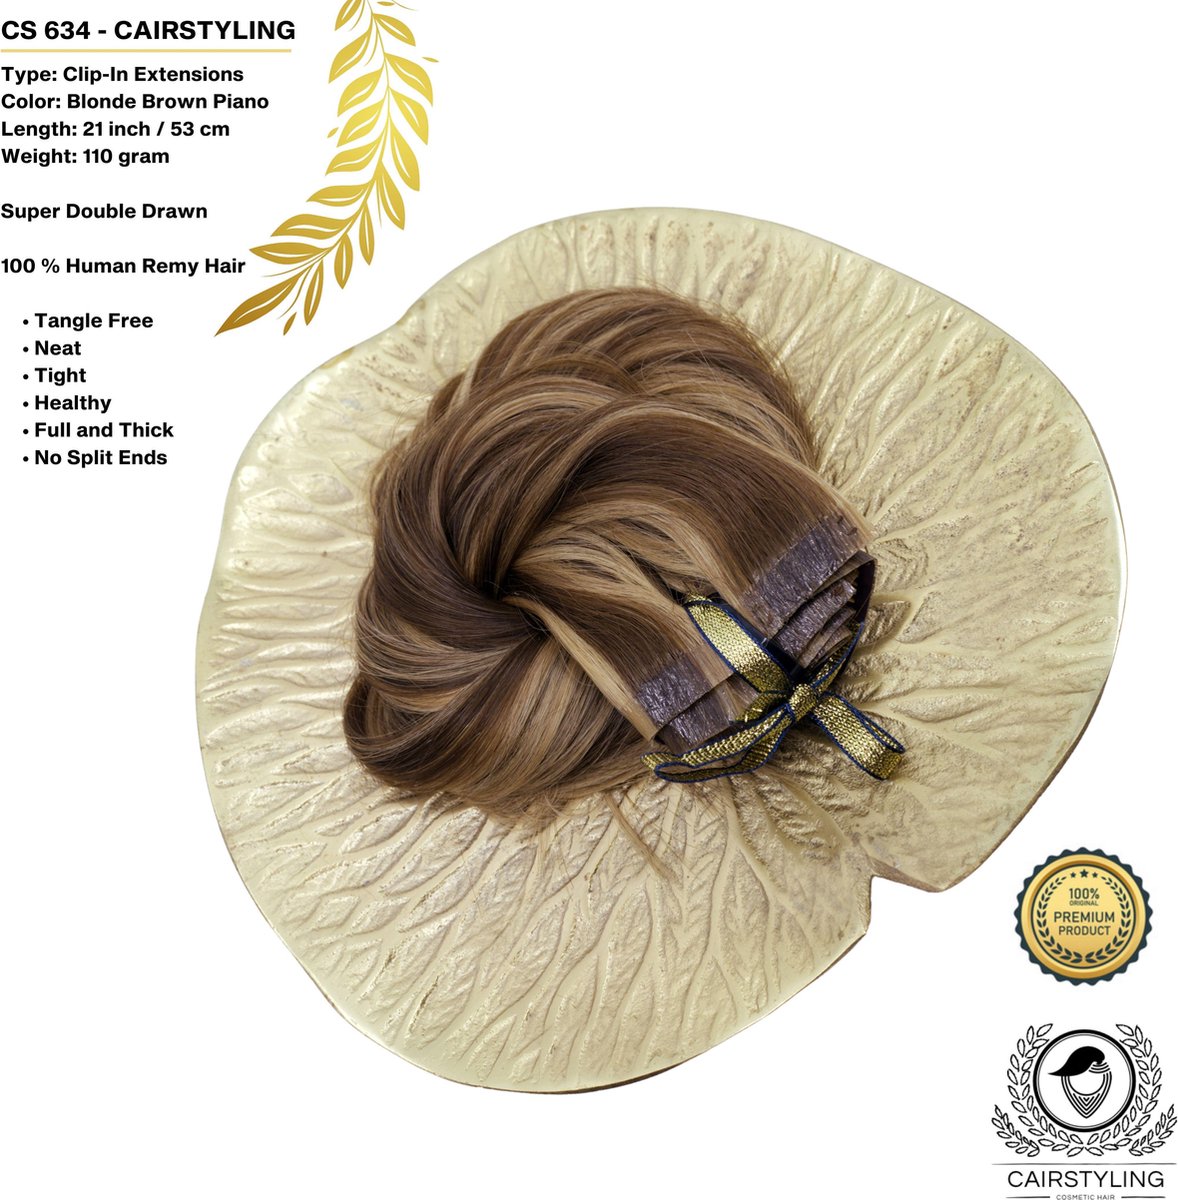 CAIRSTYLING Premium 100% Human Hair - CS634 INVISIBLE CLIP-IN - Super Double Remy Human Hair Extensions | 110 Gram | 53 CM (21 inch) | Haarverlenging | Quality Hair Long-term Use | 2022 Trending Seamless Invisible Laces | Piano Brown Blonde